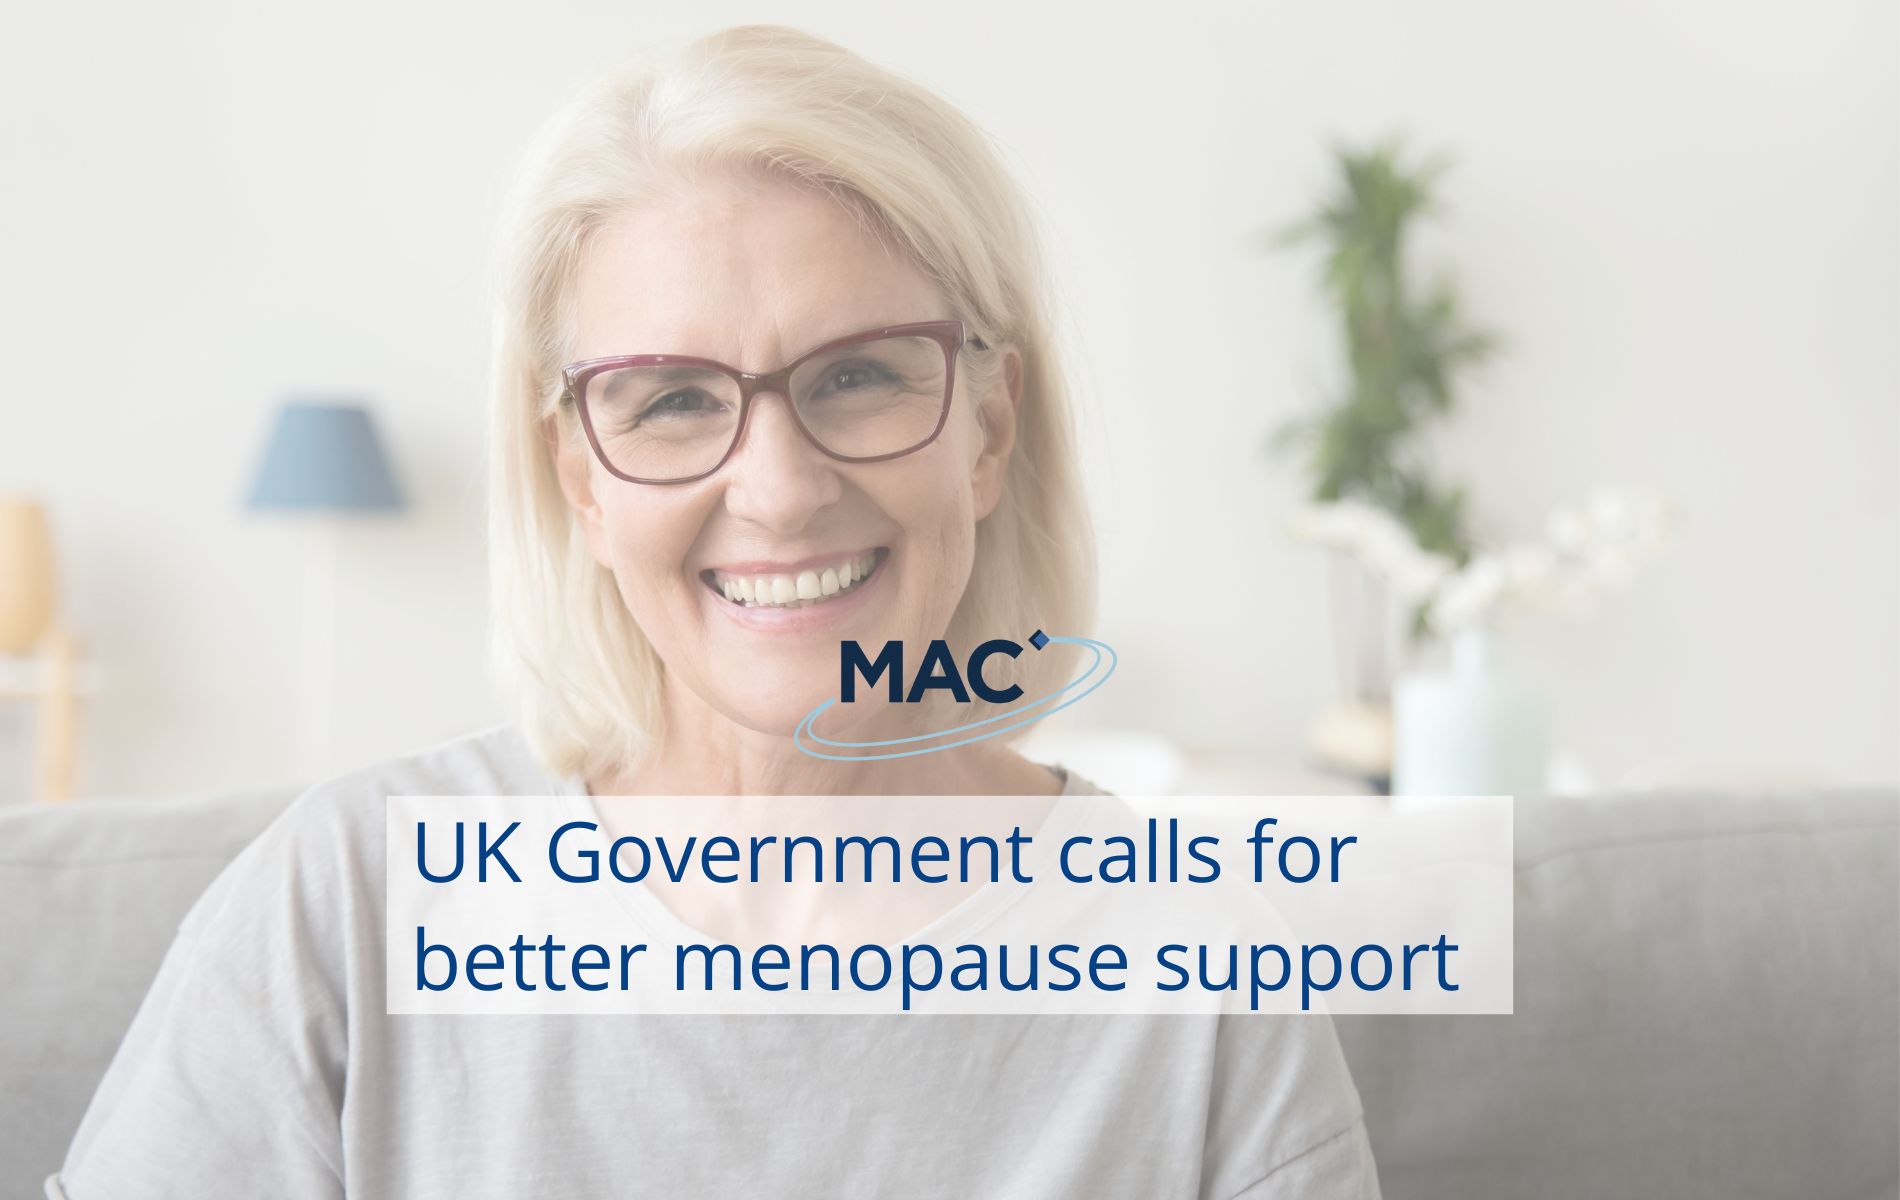 UK Government calls for better menopause support